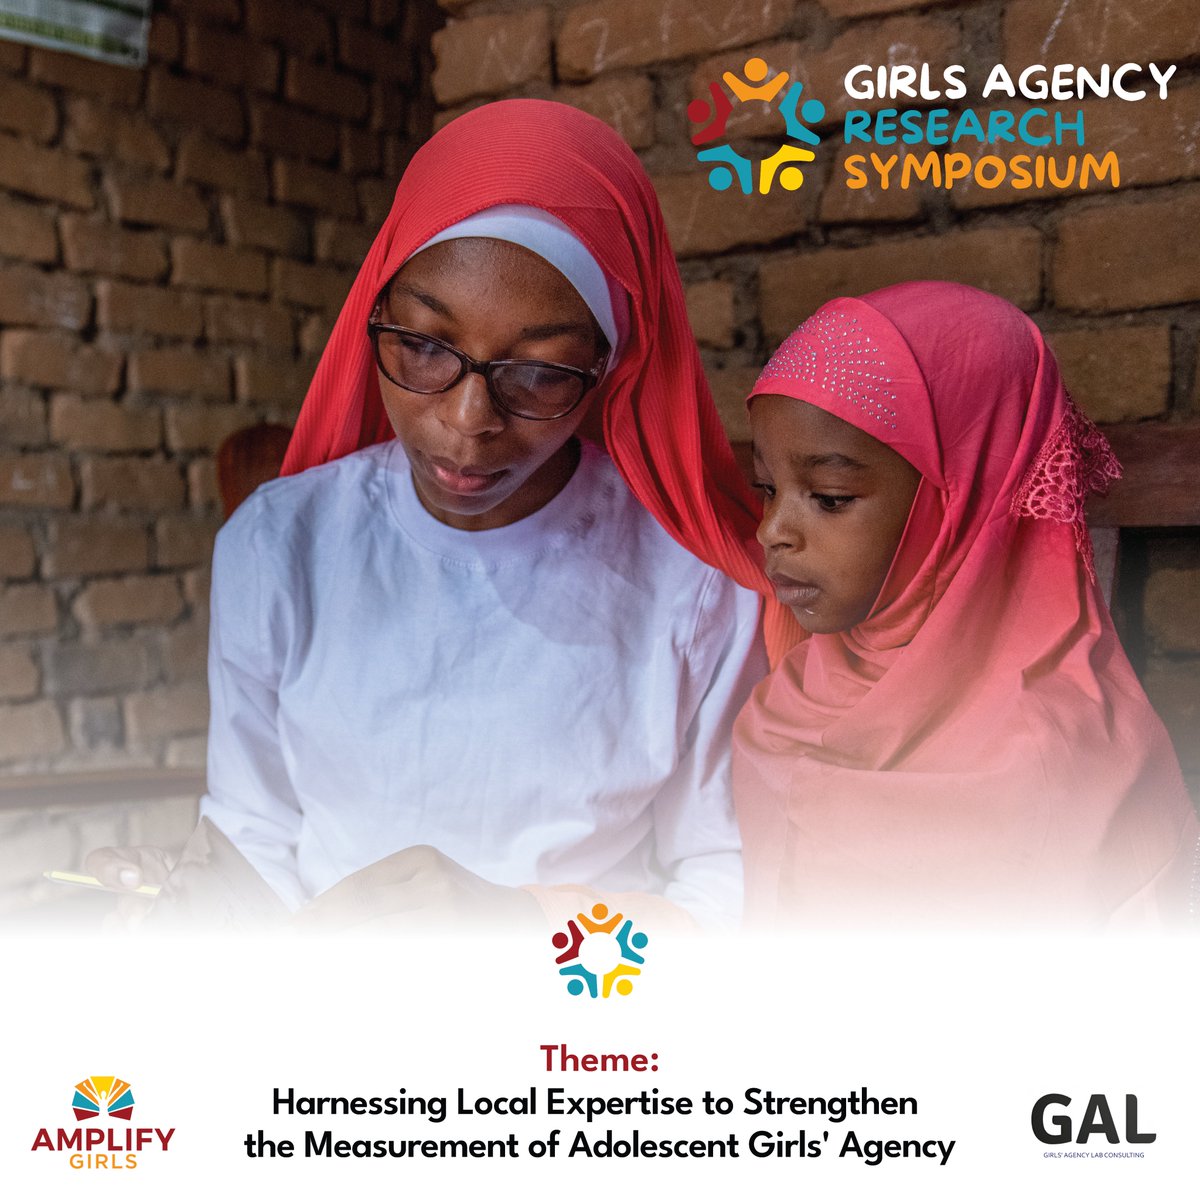 Next week the AMPLIFY Girls team will be in Nairobi🇰🇪 for the long-awaited Girls Agency Research Symposium hosted in collaboration with GAL Consulting. The research-focused event will feature our partners who took part in the validation of the Adolescent Girls Agency Survey. 1/2